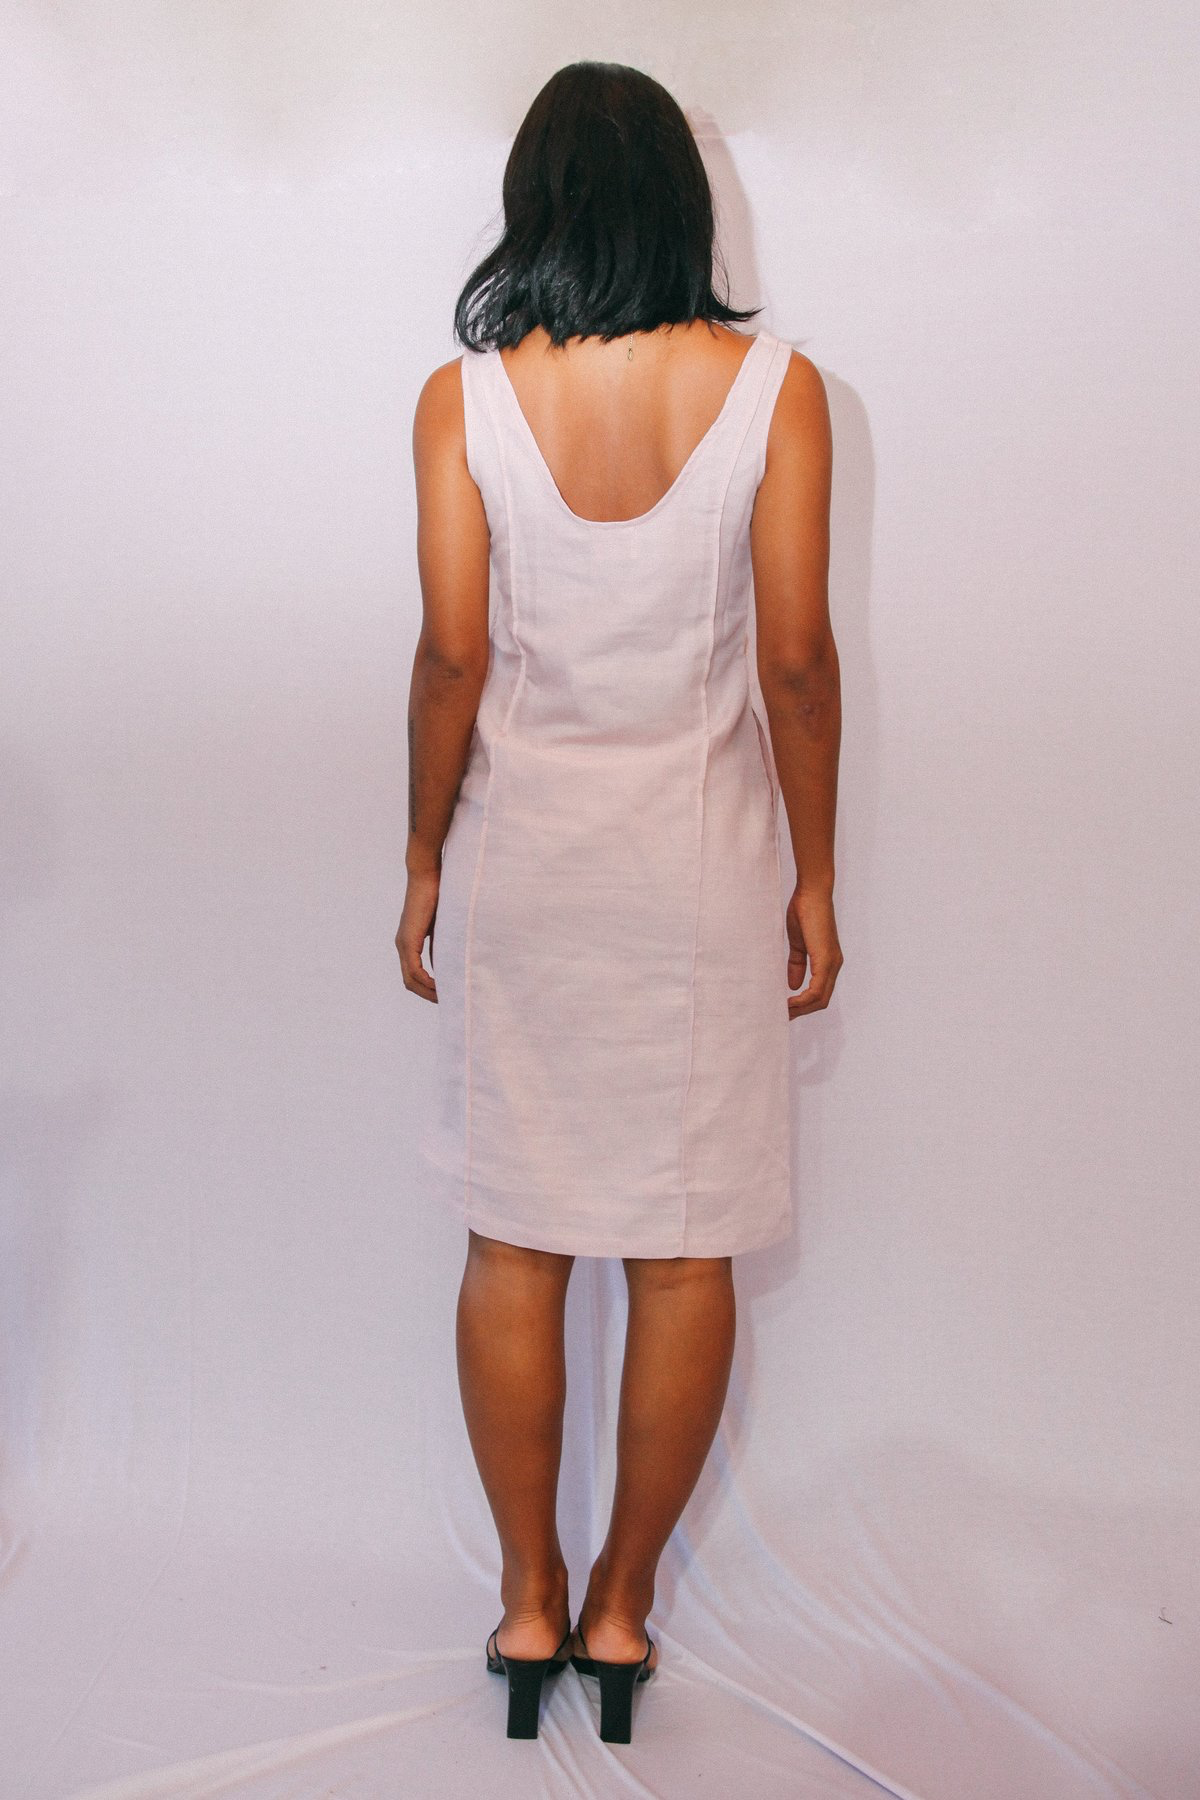 Stain Sahara Dress in Lychee, available in ZERRIN